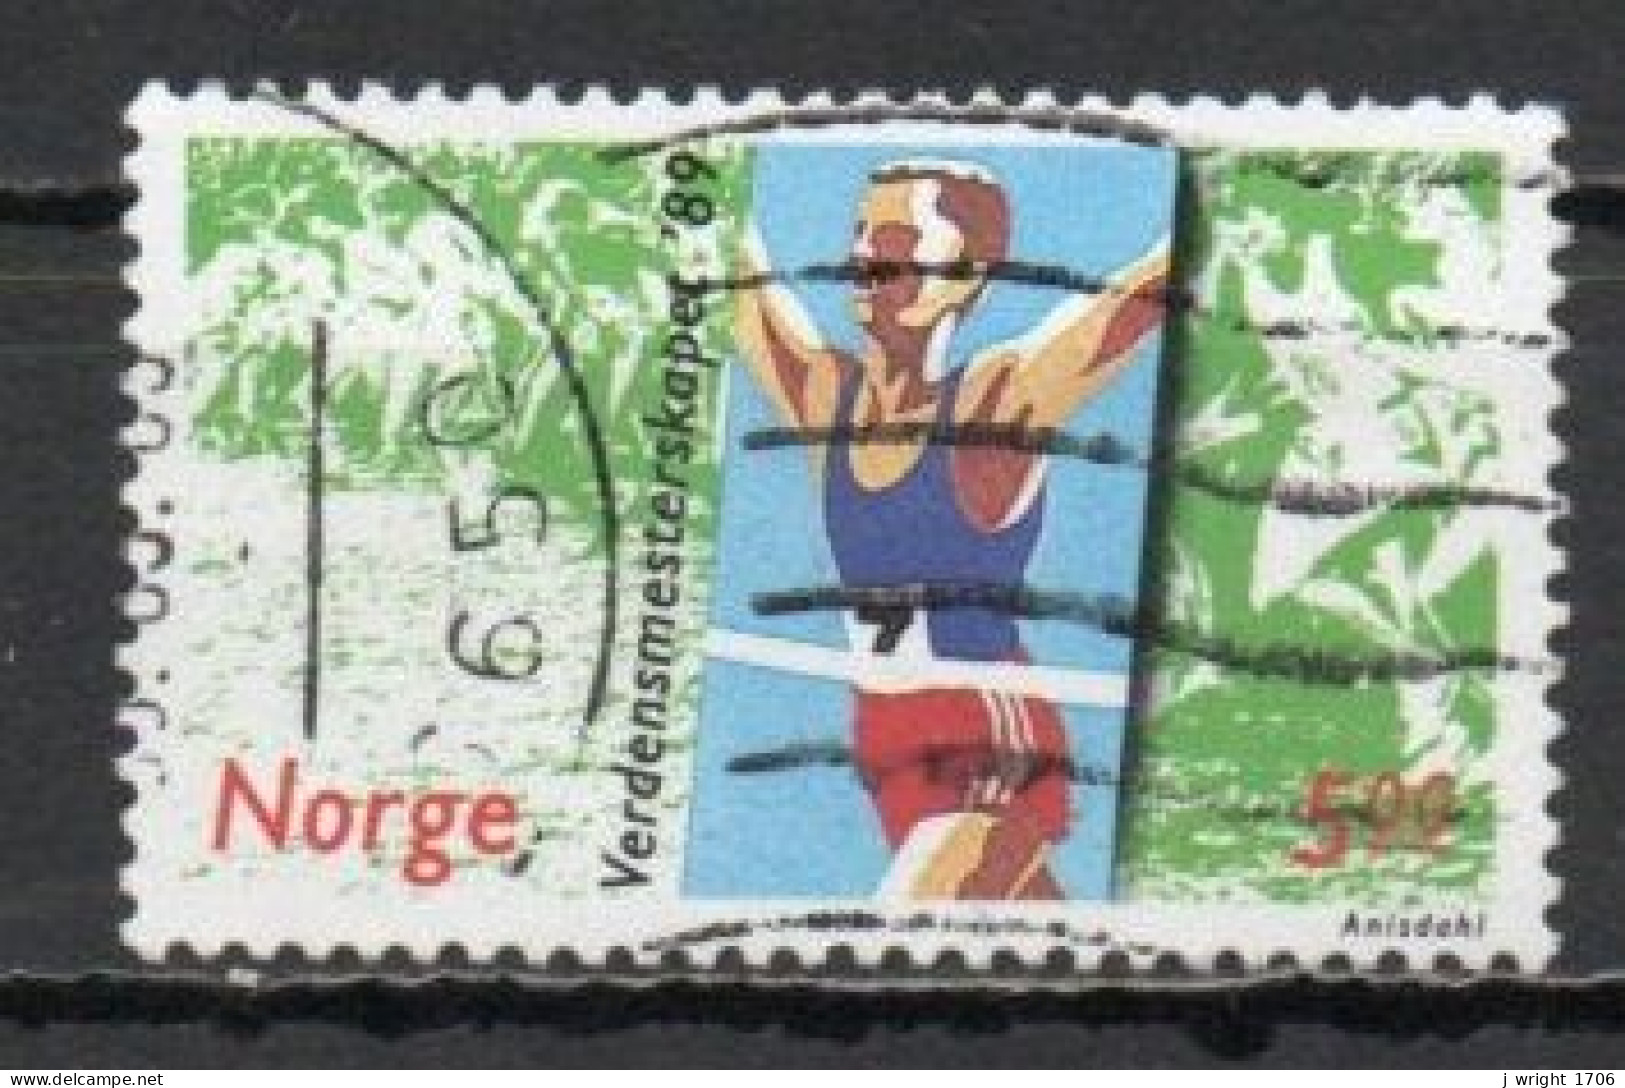 Norway, 1989, World Cross Country Championships, 5kr, USED - Usados